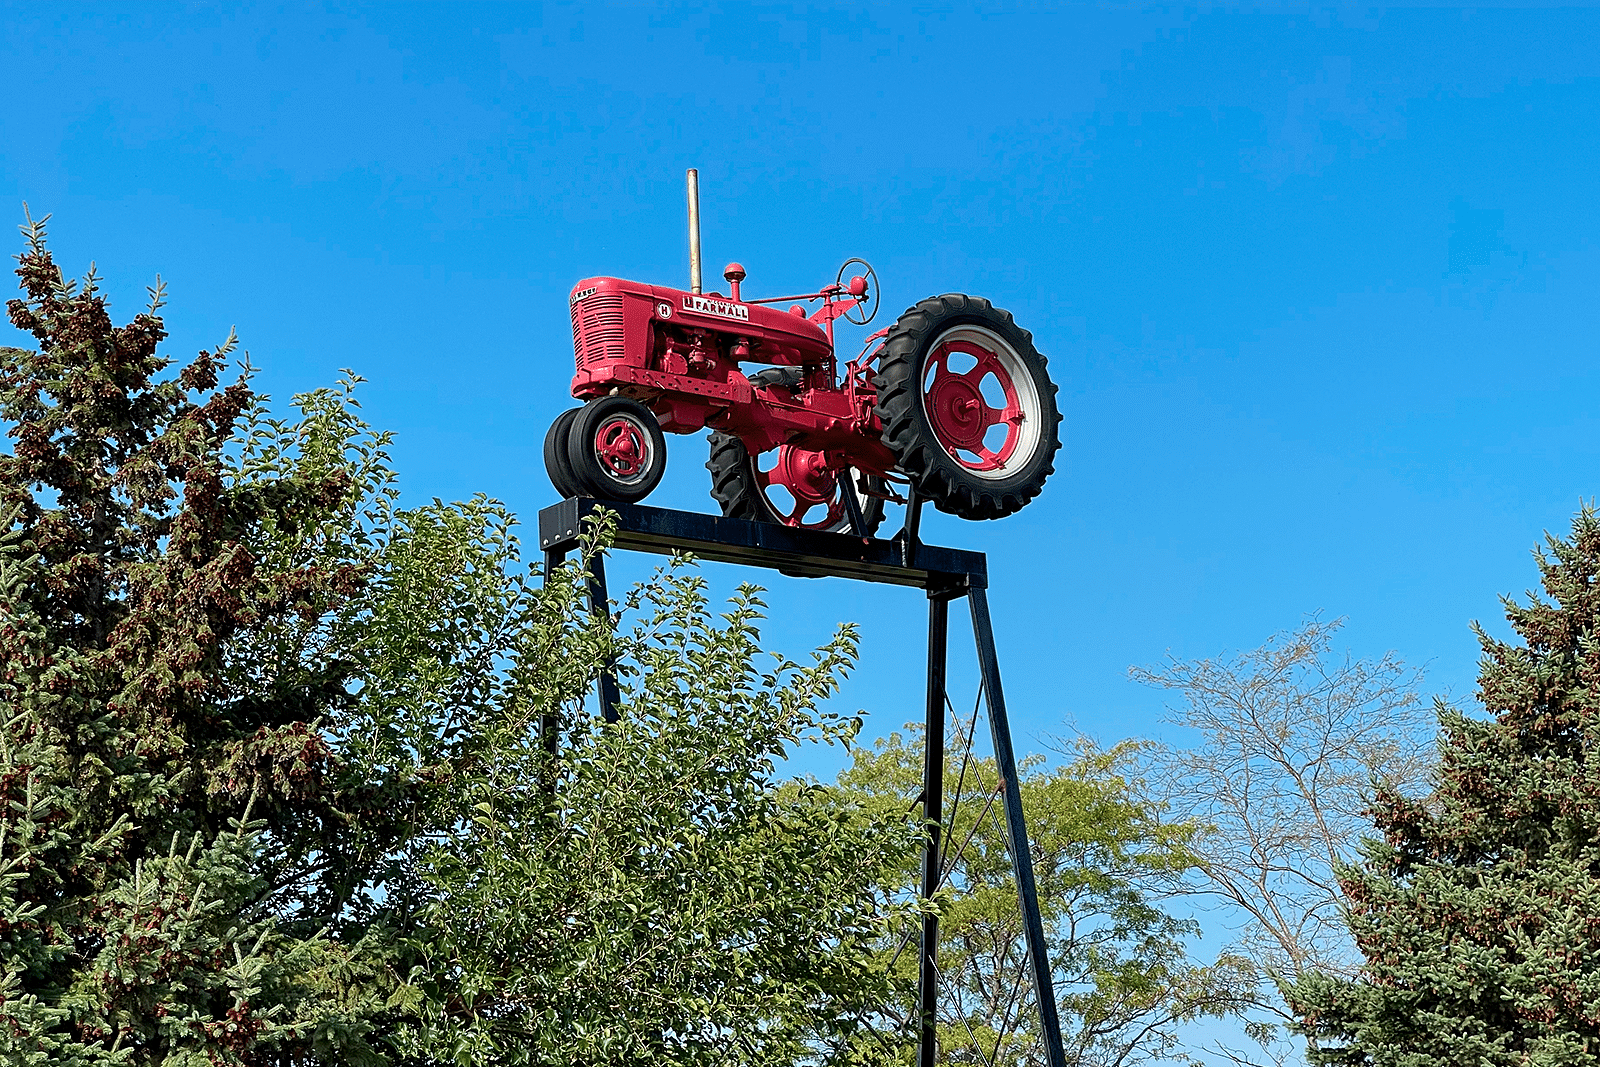 Farmall H on the top of a tall tower, welcoming guests to Farmall Land.